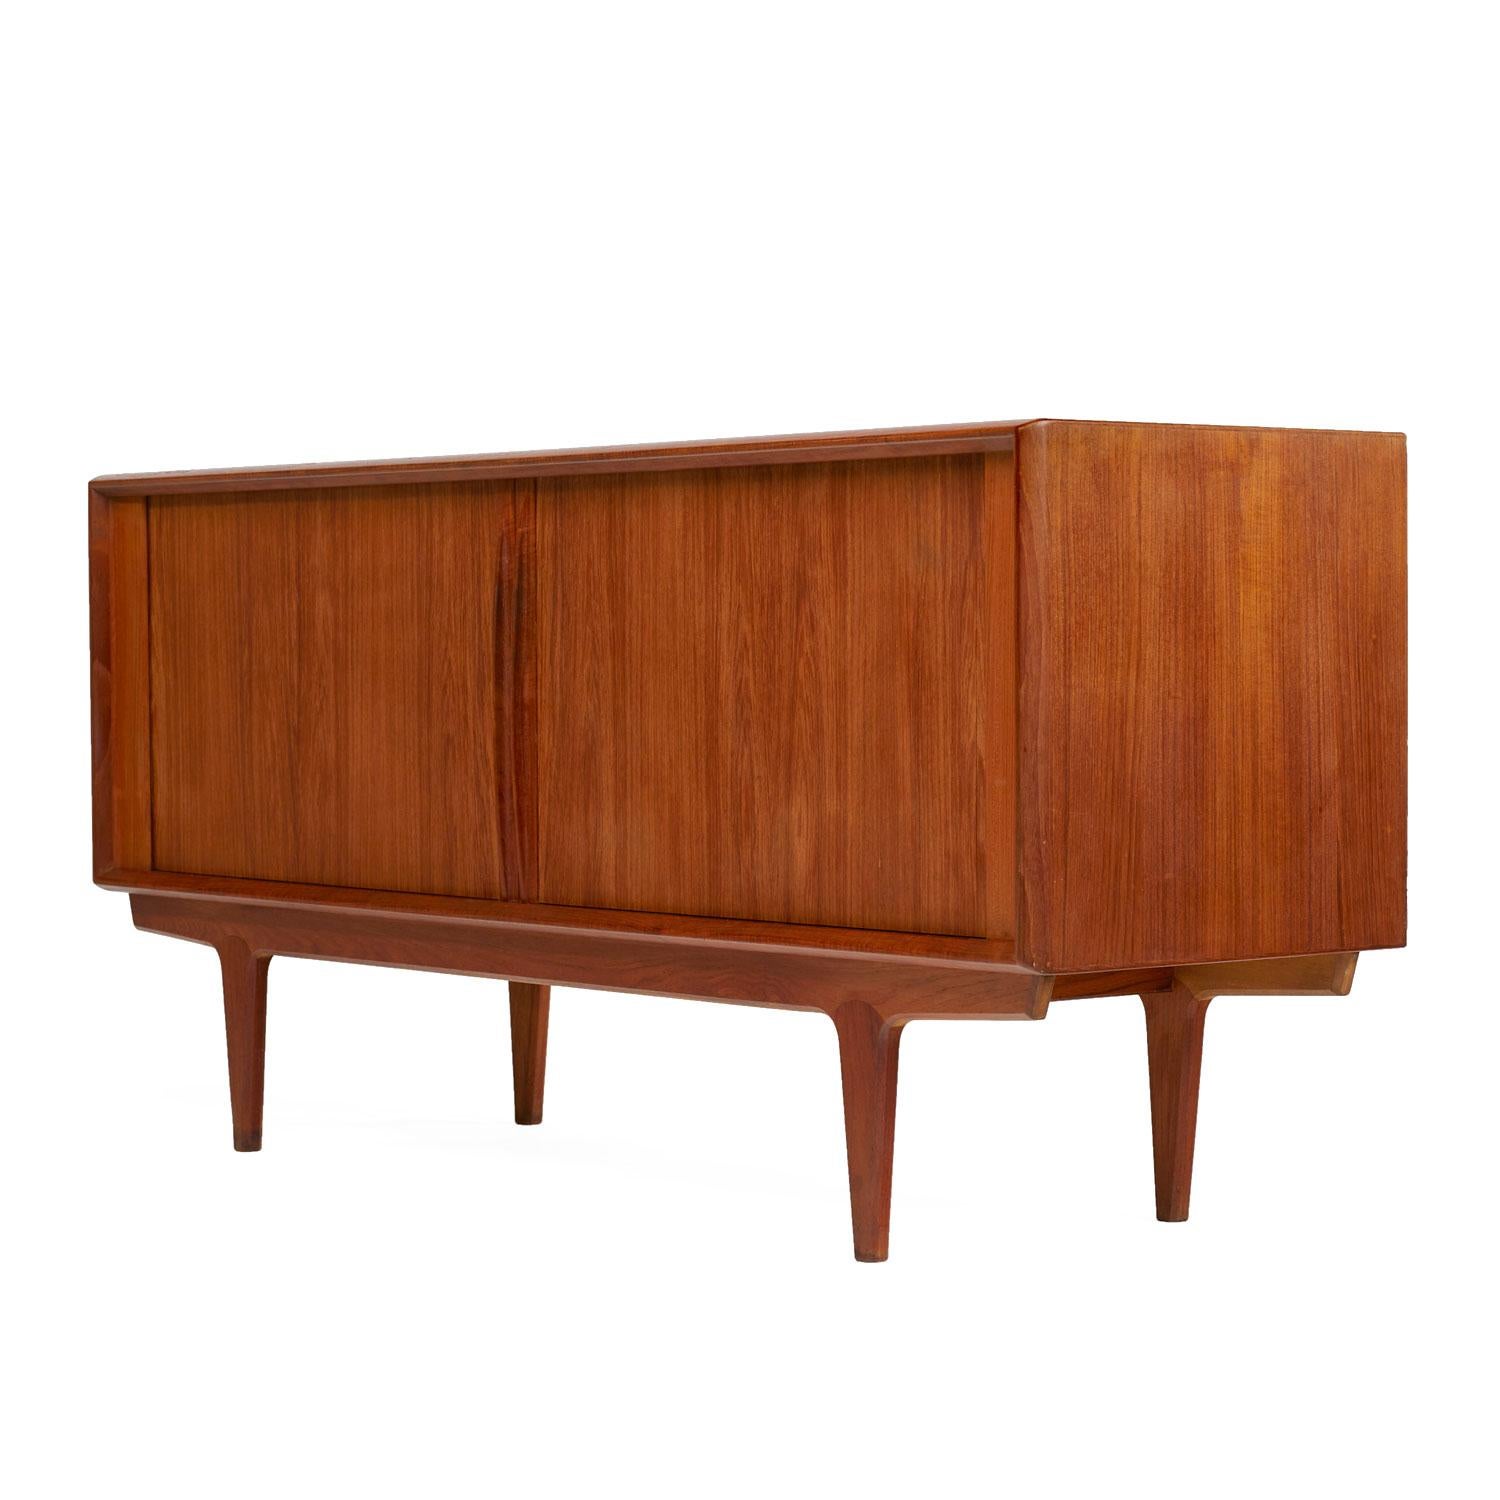 Scandinavian Modern Danish teak tambour door credenza by Bernhard Pedersen & Son. Expertly crafted with sleek lip-like, solid teak carved handles gracing the tambour doors. Open the cabinet to reveal cabinet space at left and right. A stack of three